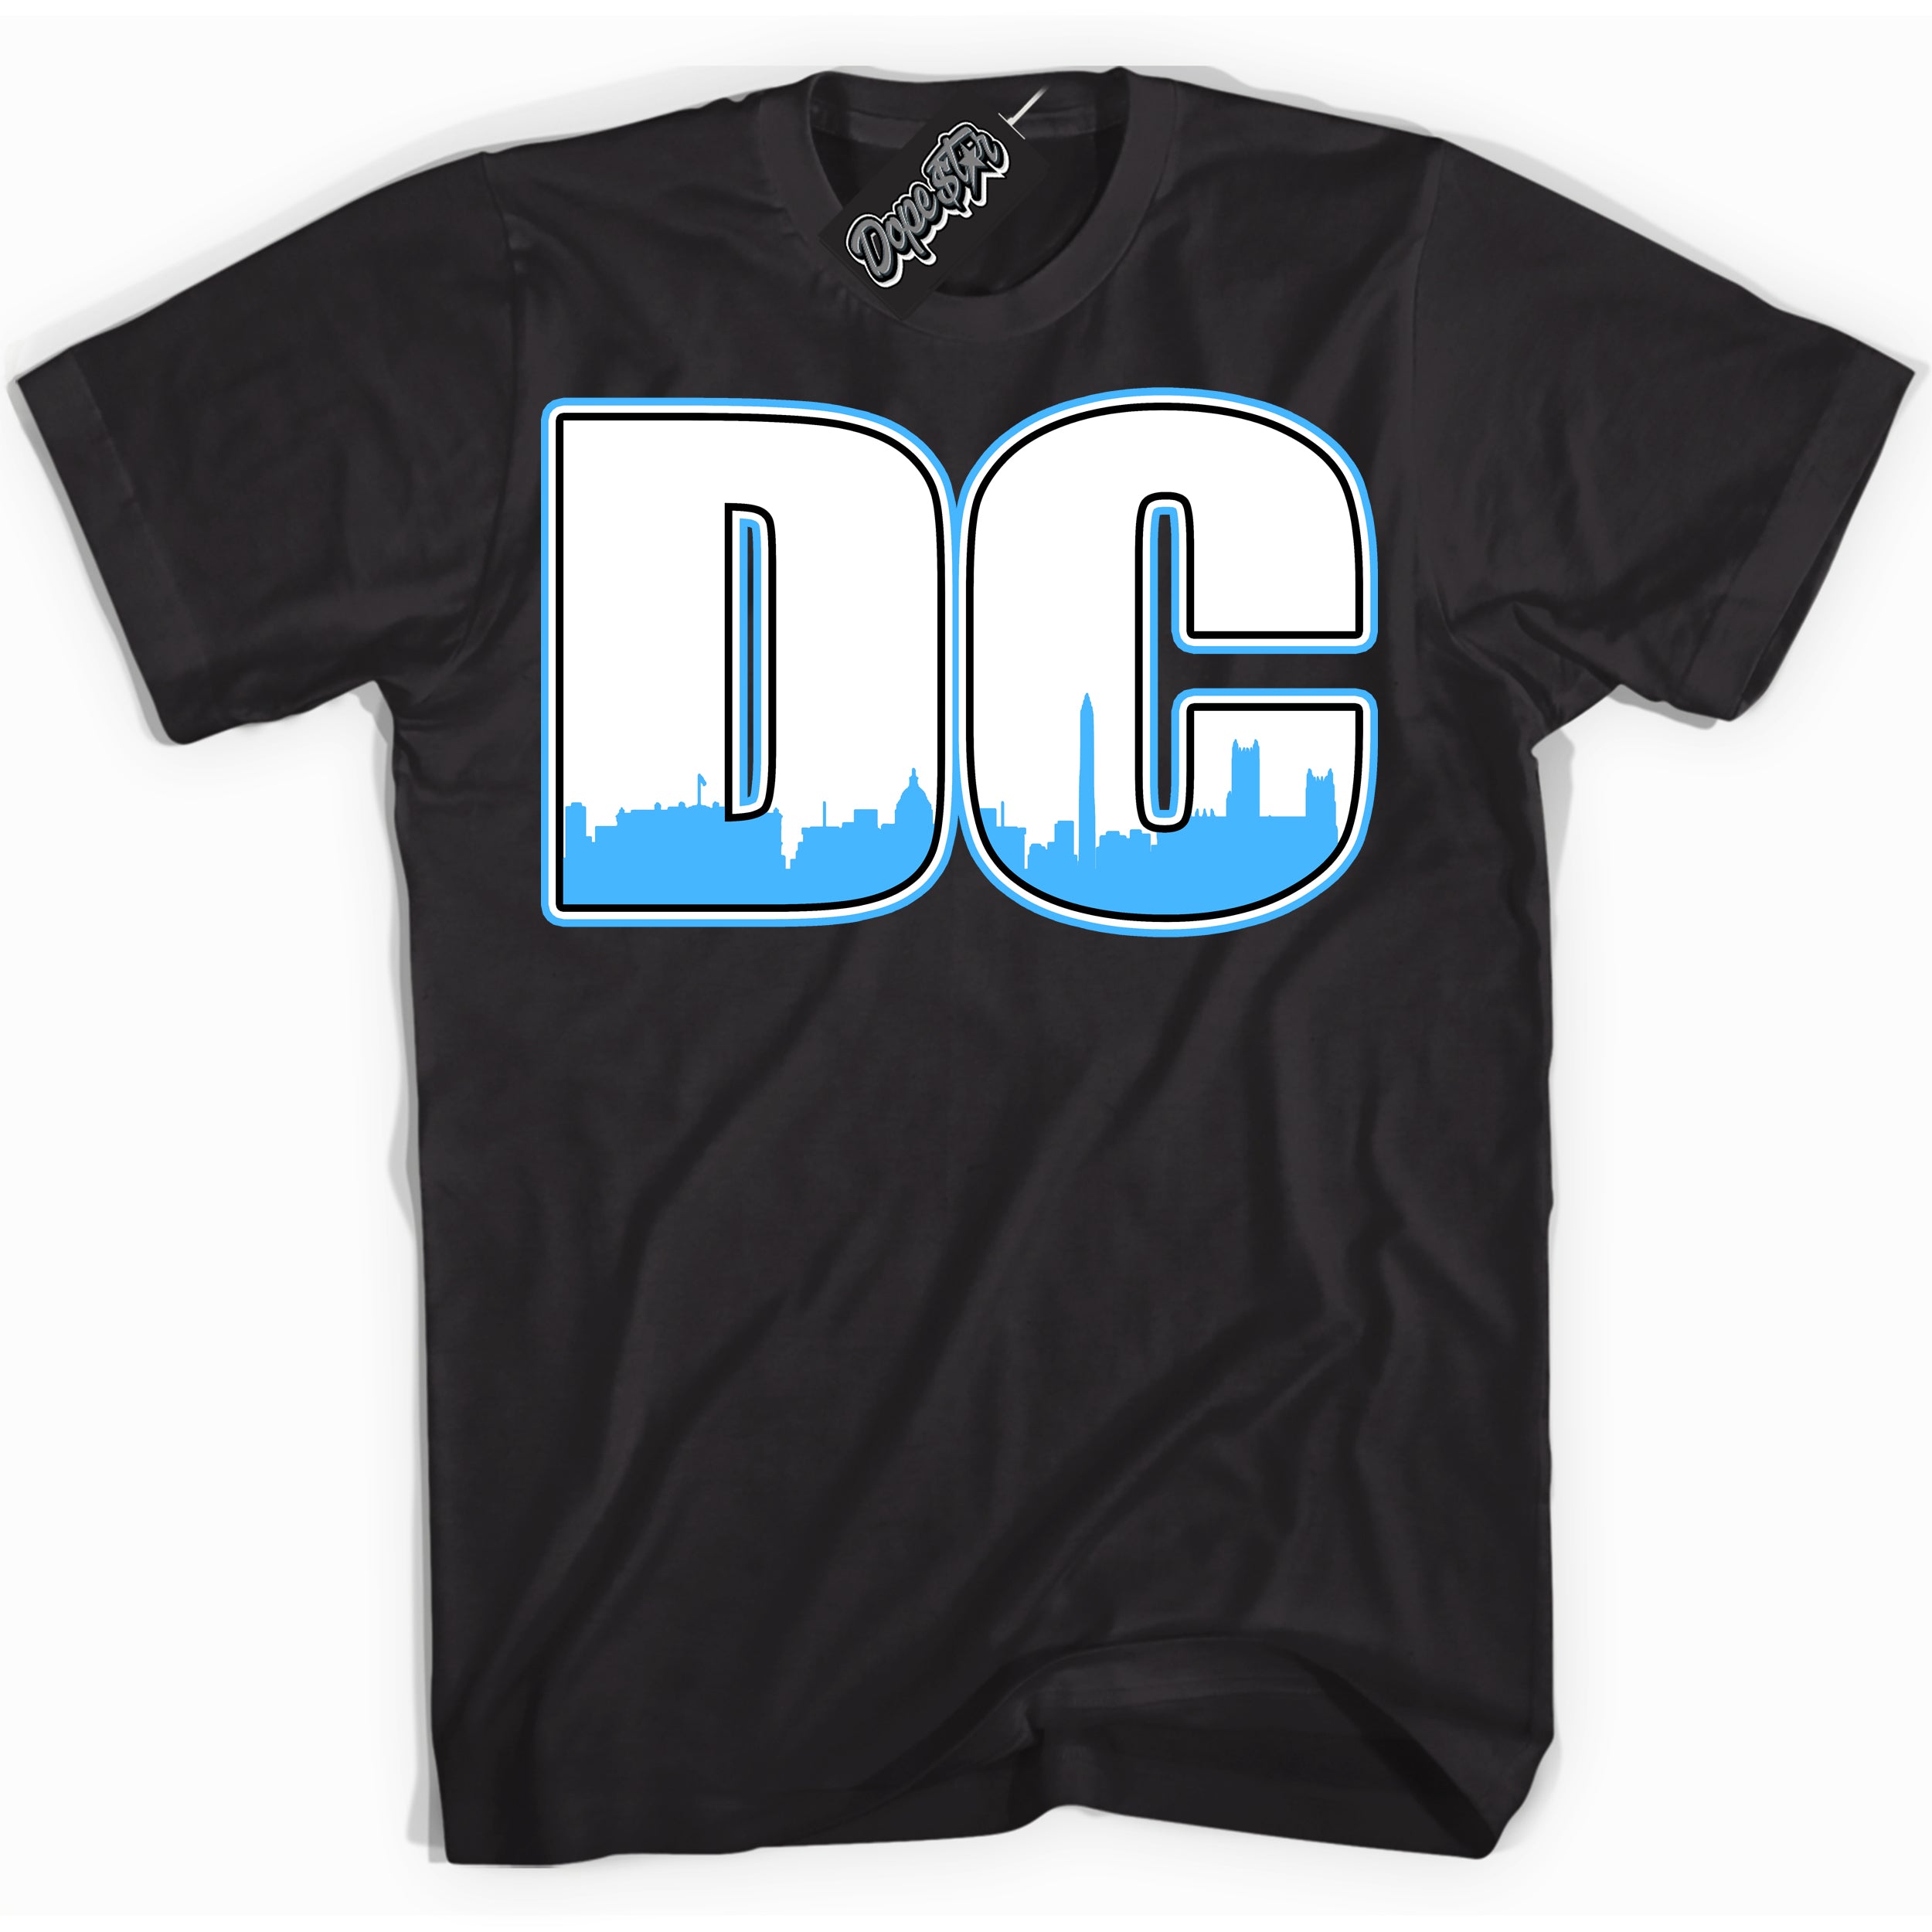 Cool Black graphic tee with “ DC ” design, that perfectly matches Powder Blue 9s sneakers 